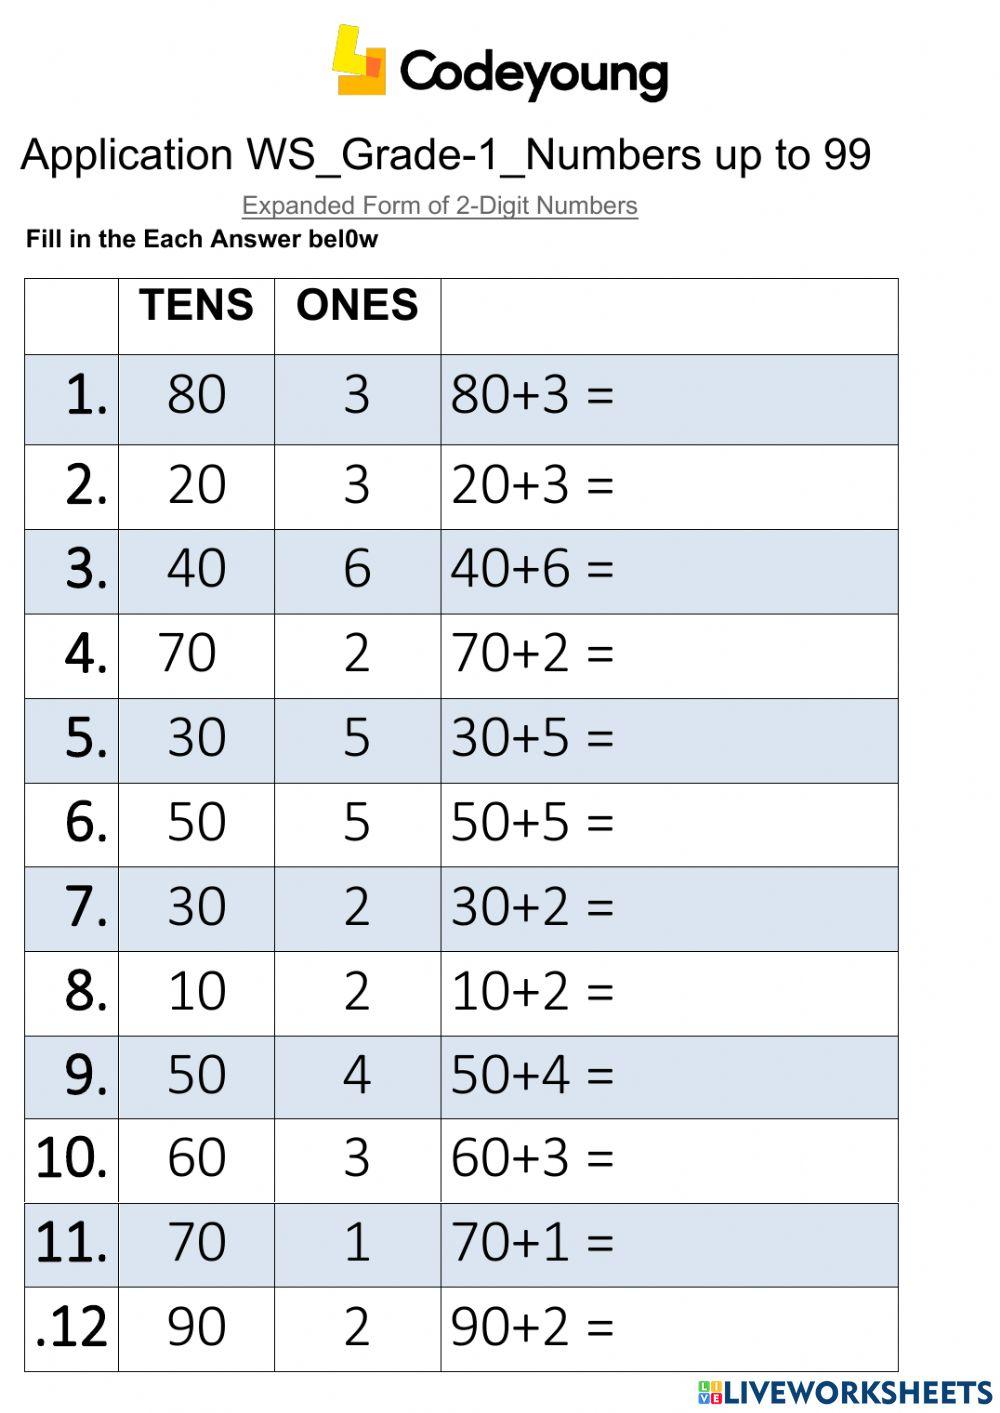 Expanded Form of 2-Digit Numbers-Apllication WS